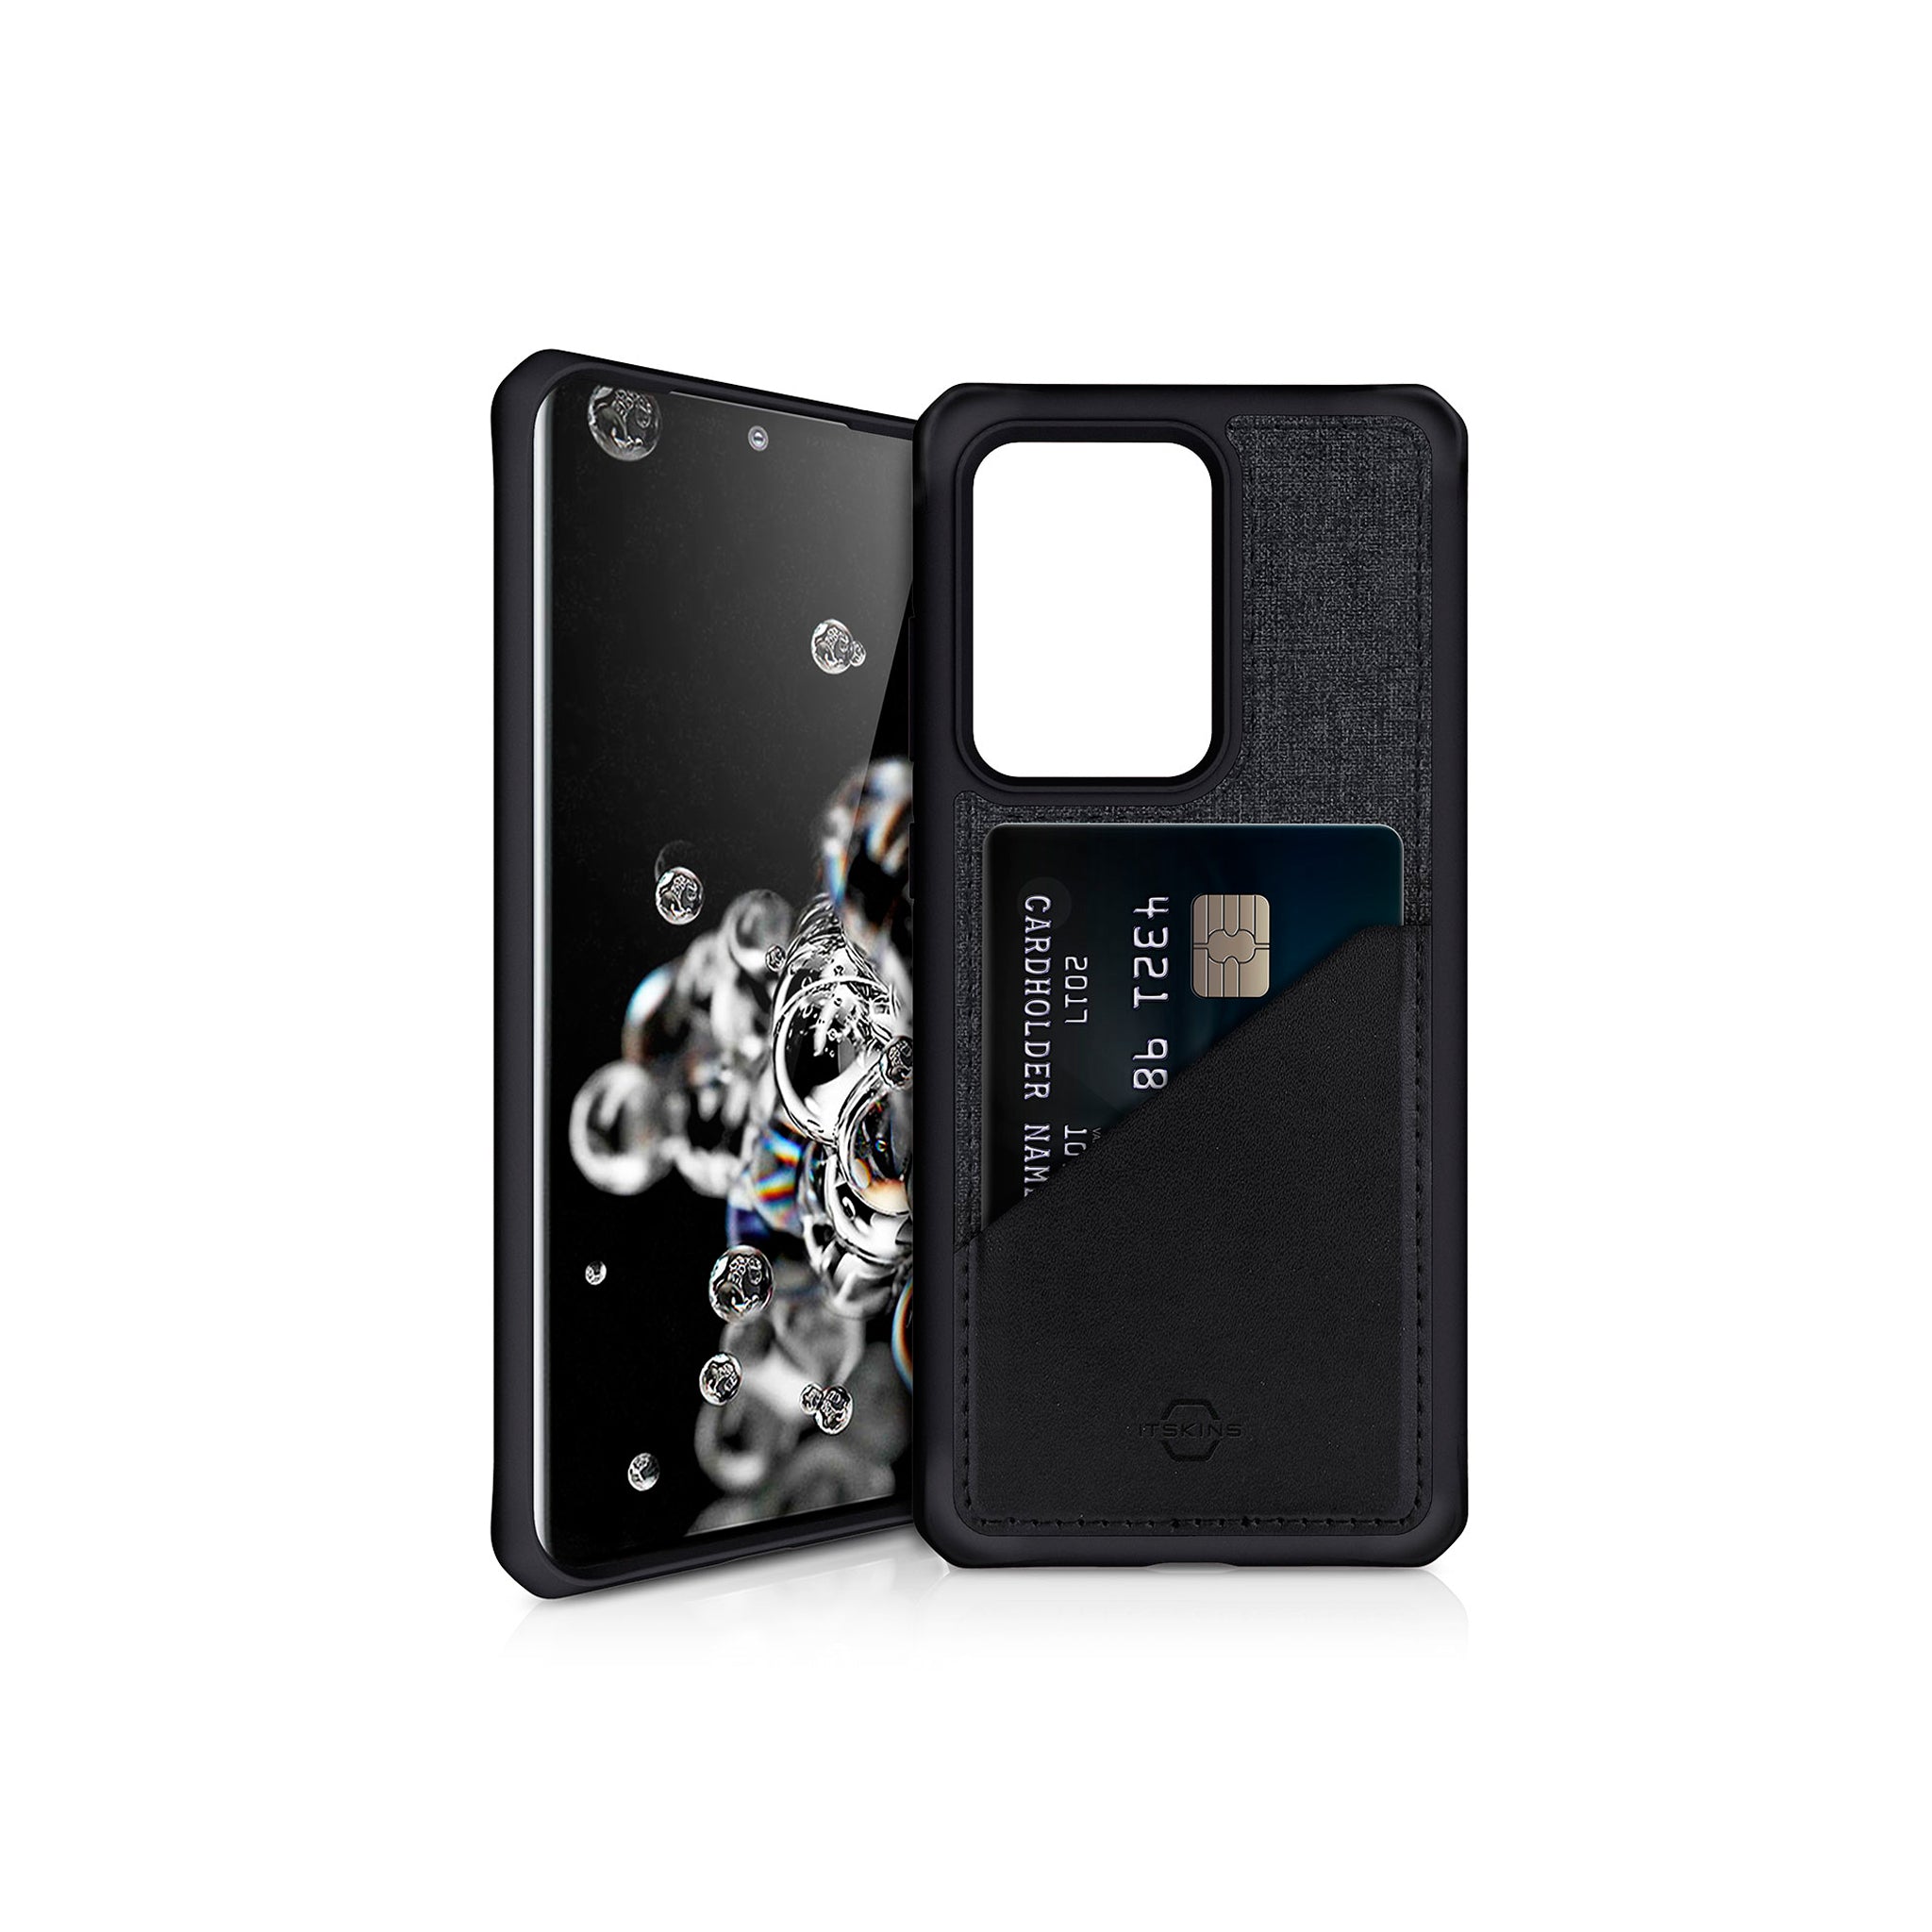 Itskins - Hybrid Fusion Wallet Case For Samsung Galaxy S20 Ultra - Black And Gray